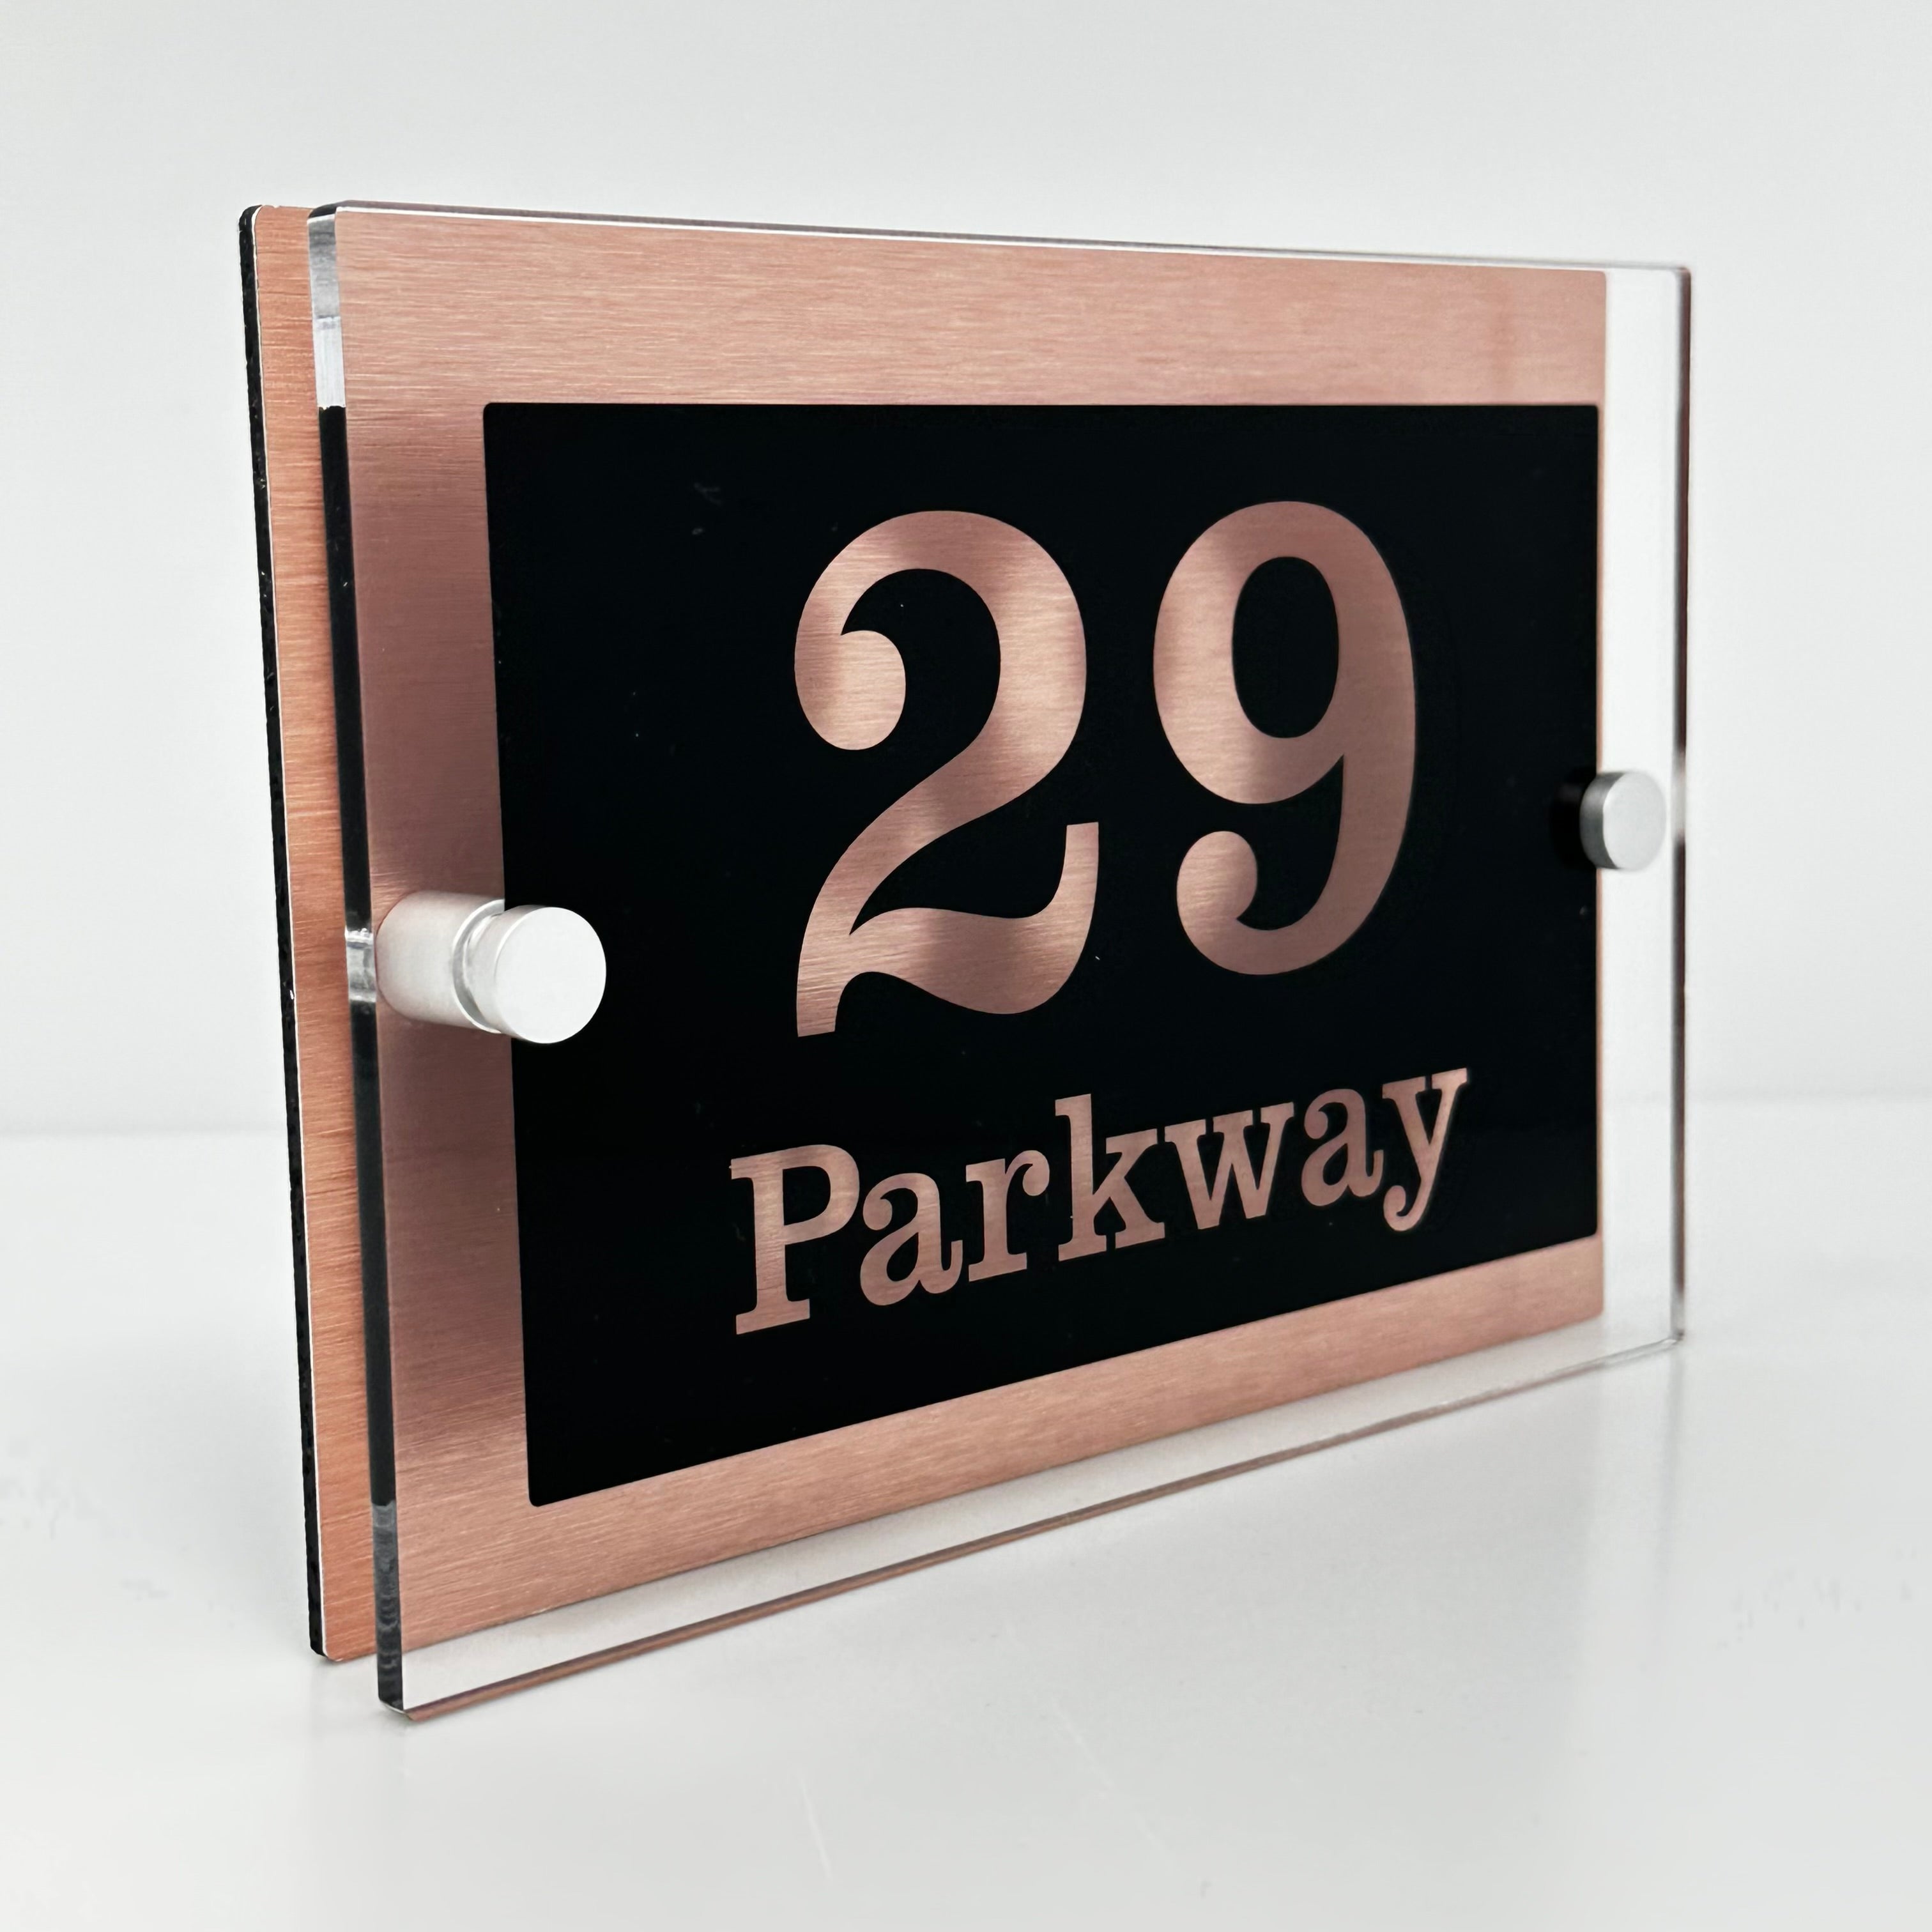 The Parkway Modern House Sign with Perspex Acrylic Front, Copper Rear Panel and Satin Silver Stand Off Fixings ( Size - 20cm x 14cm )